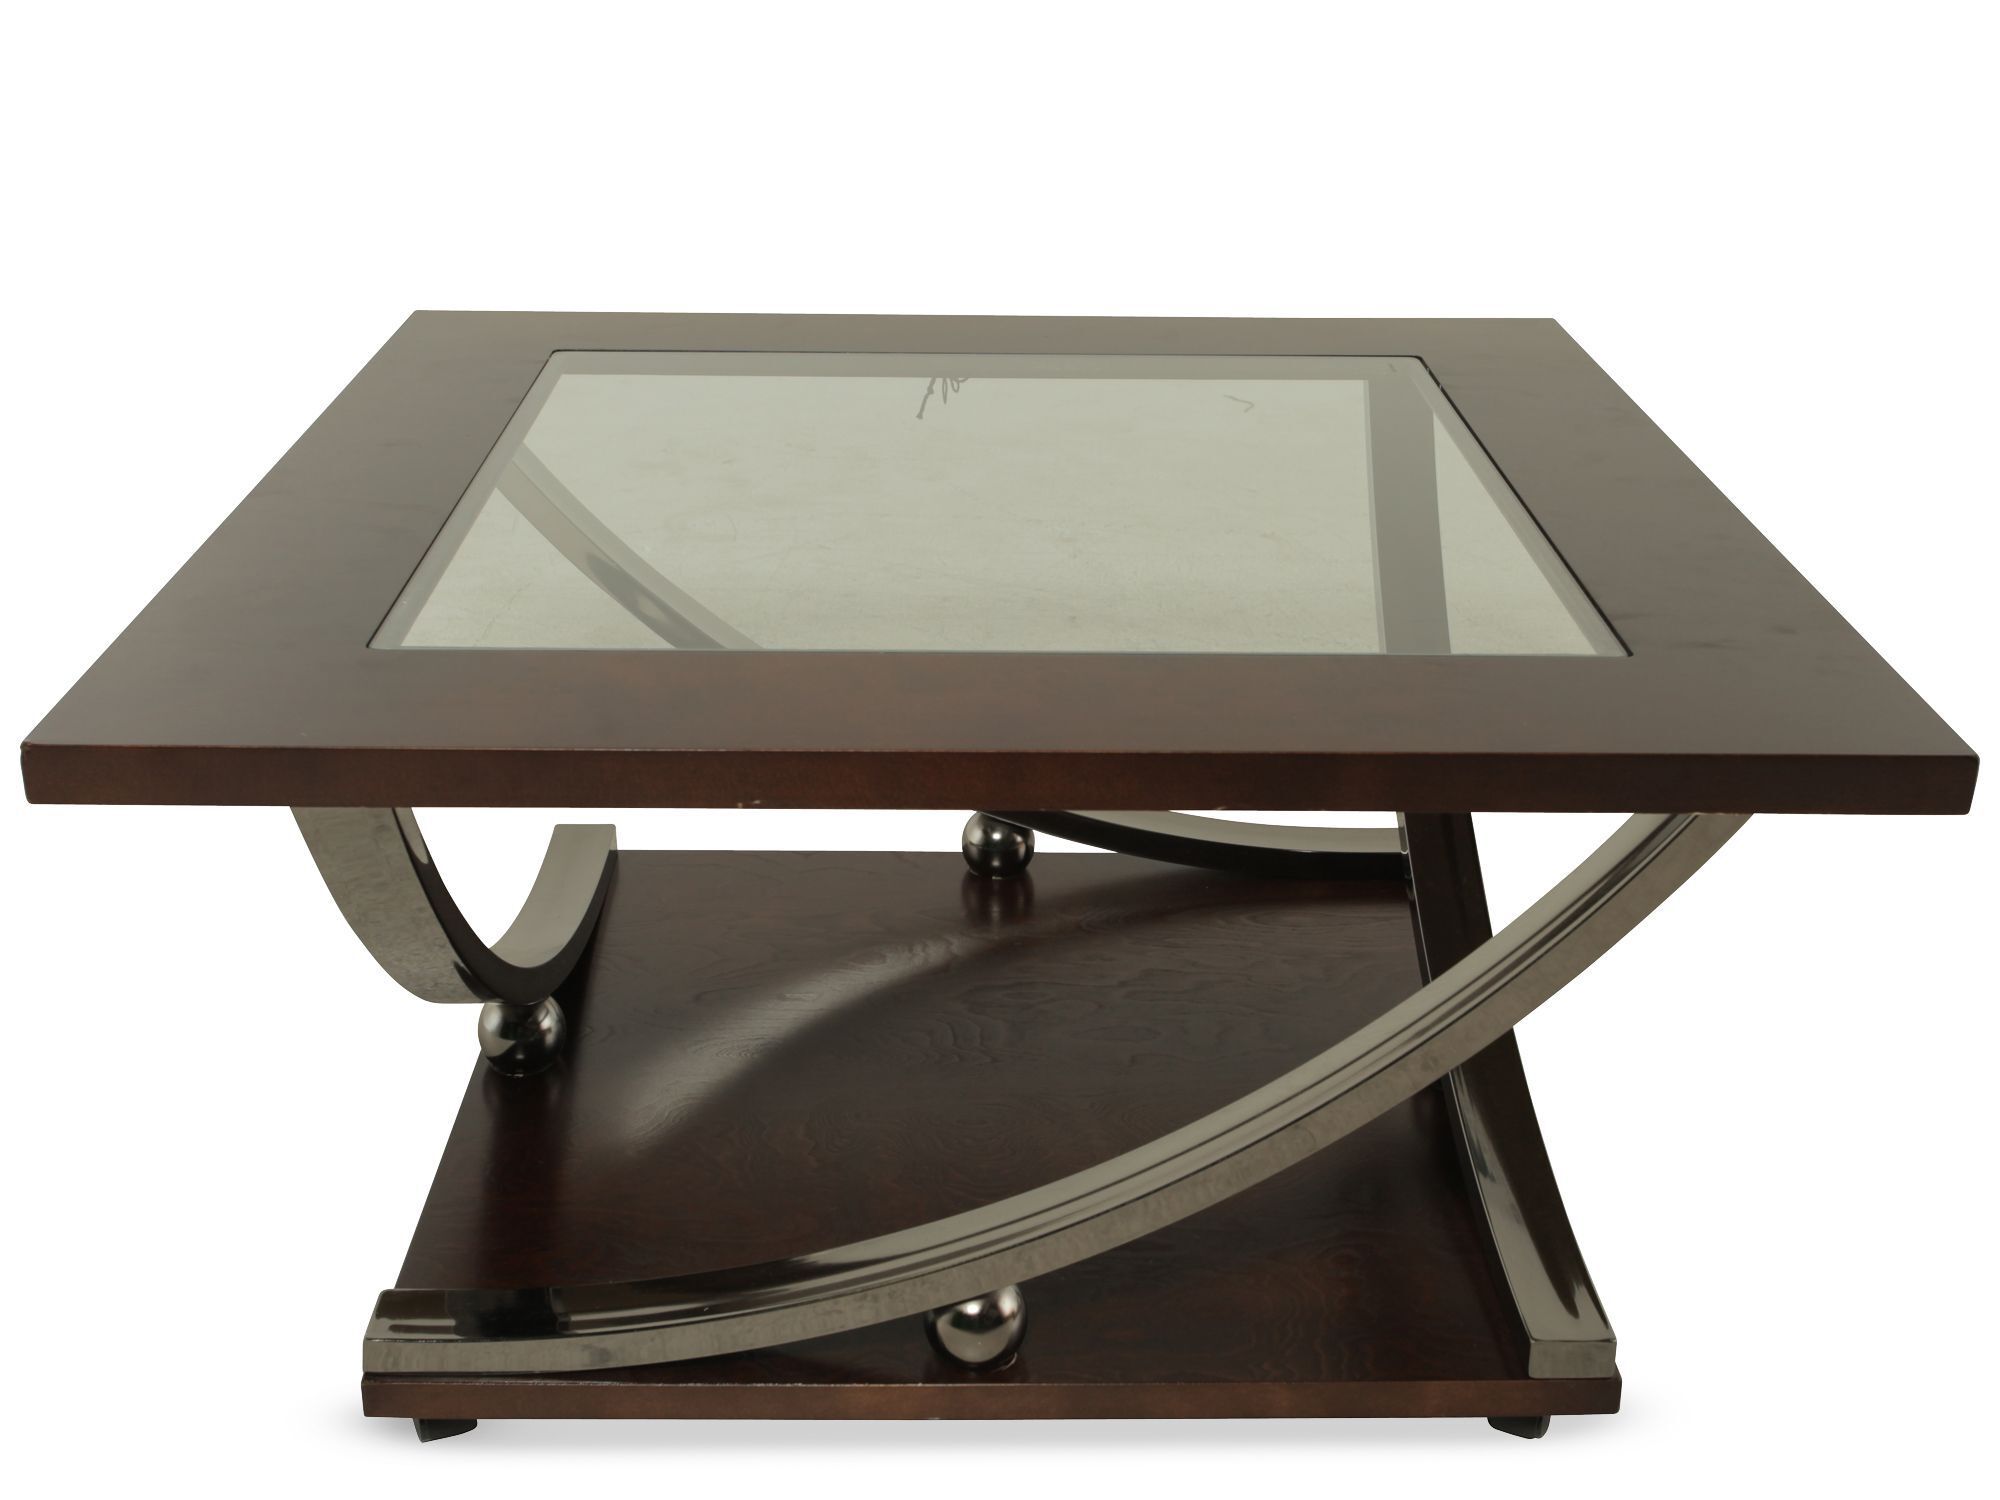 Square Contemporary Cocktail Table In Merlot | Mathis Brothers Furniture Throughout Hassch Modern Square Cocktail Tables (View 9 of 20)